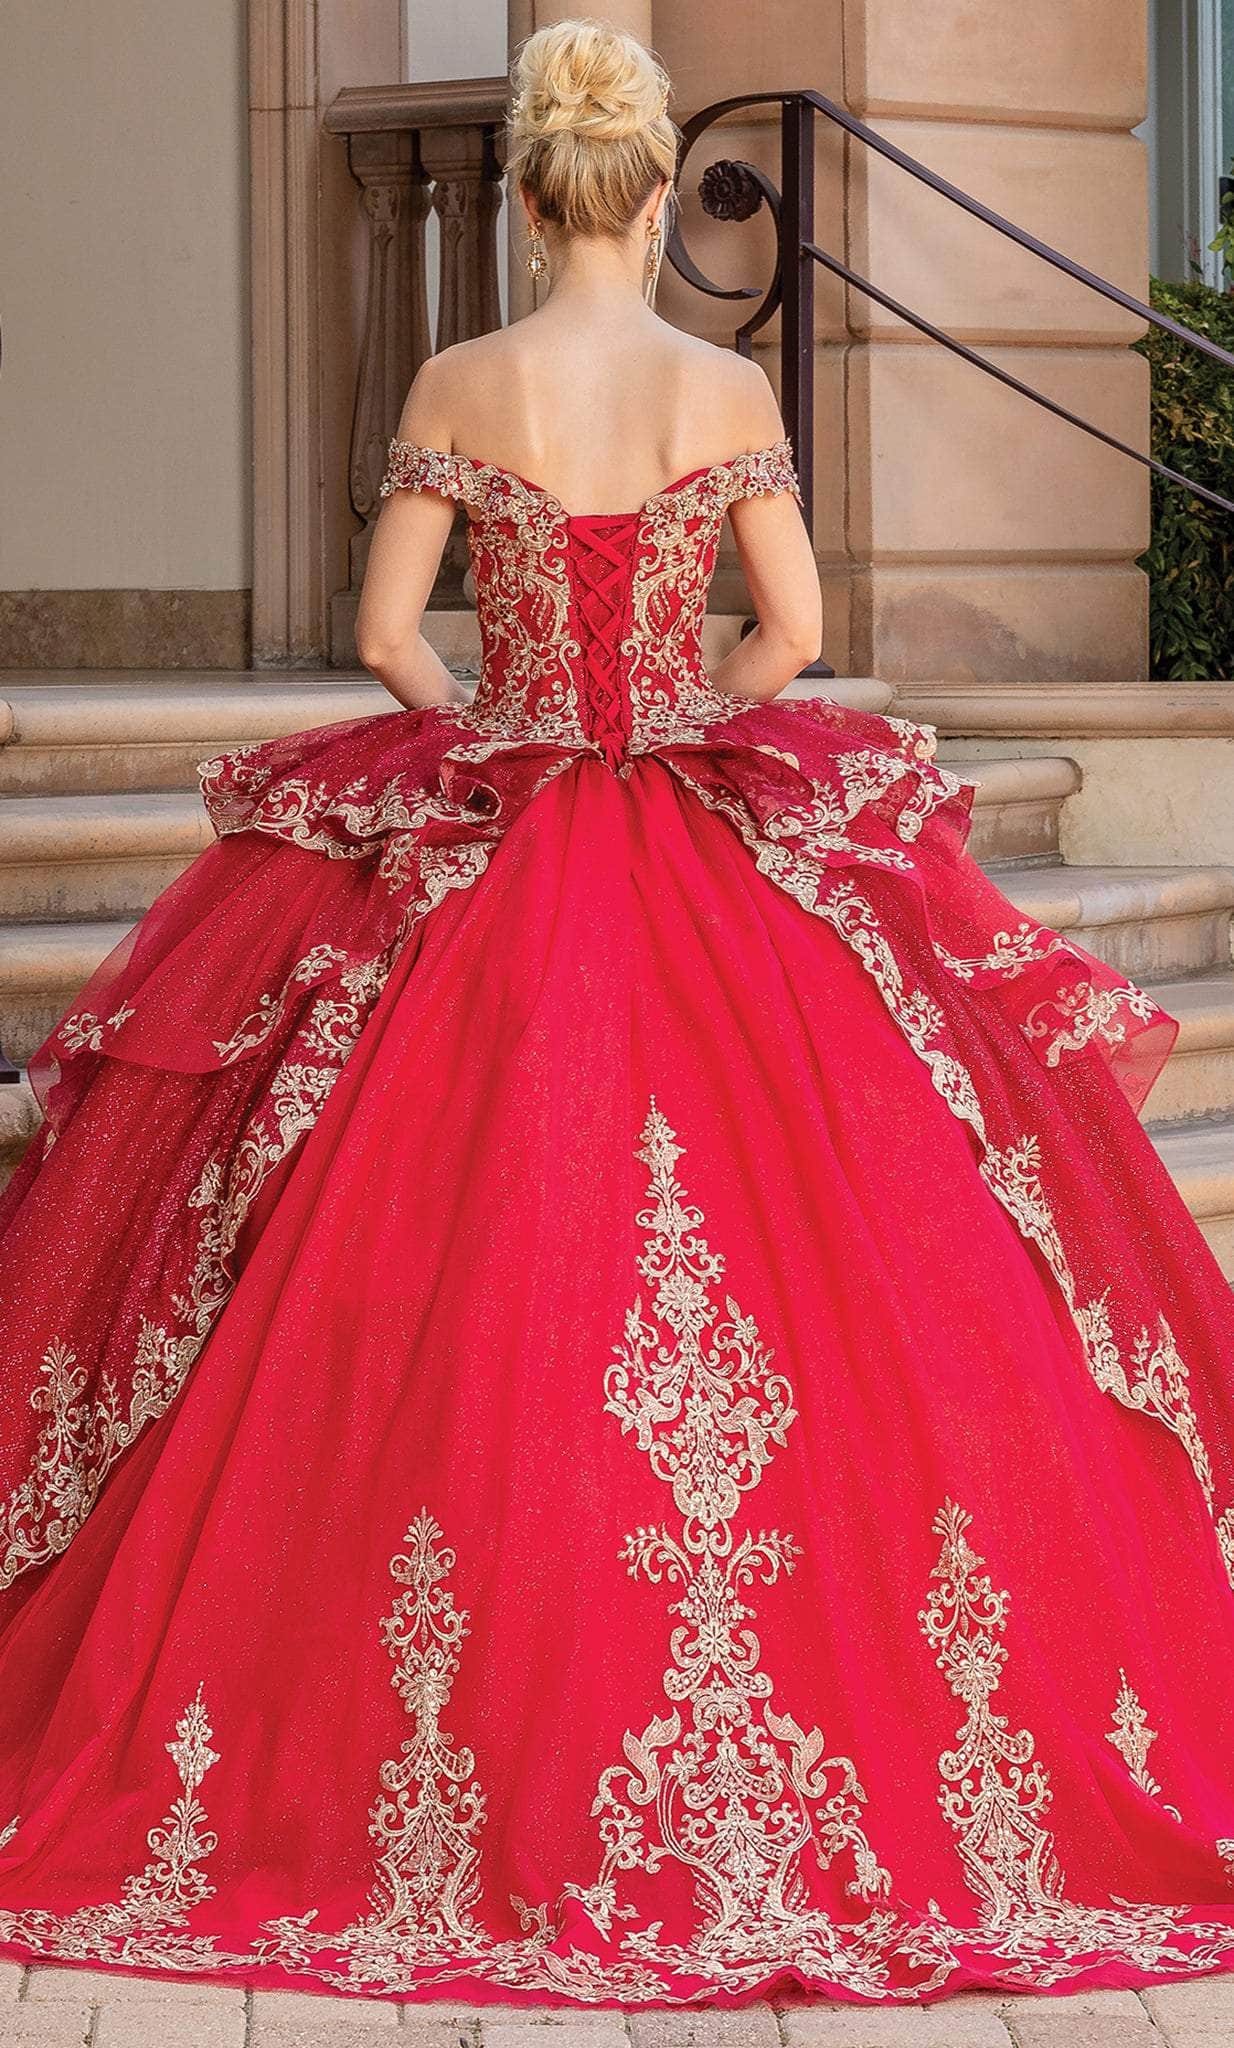 Dancing Queen 1720 - Tiered Ballgown with Cape Ball Gowns